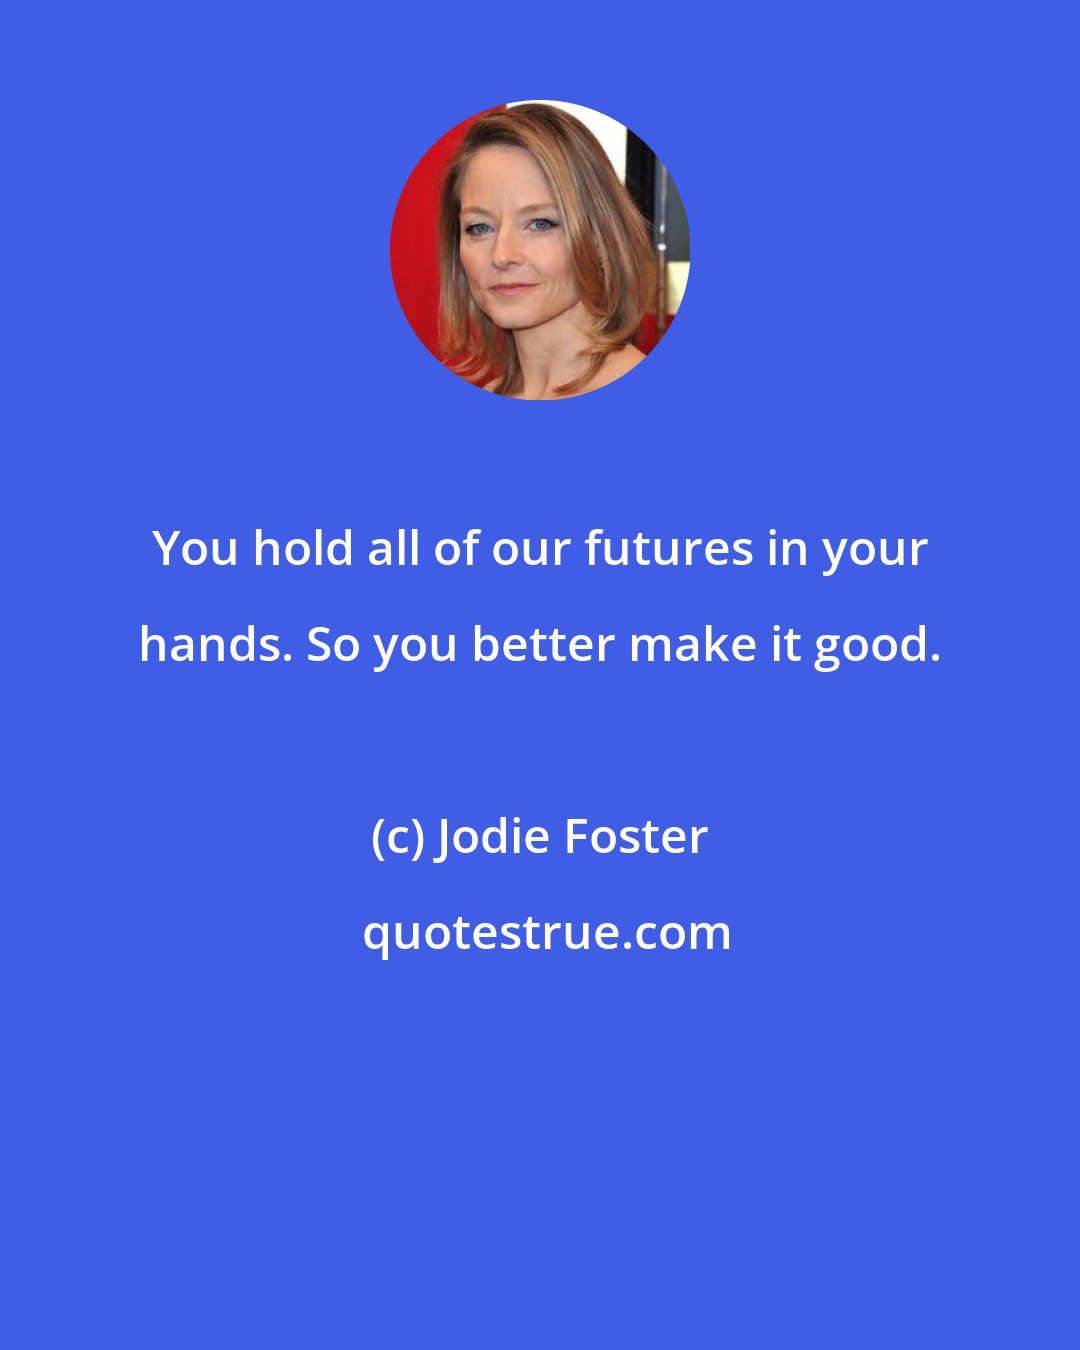 Jodie Foster: You hold all of our futures in your hands. So you better make it good.